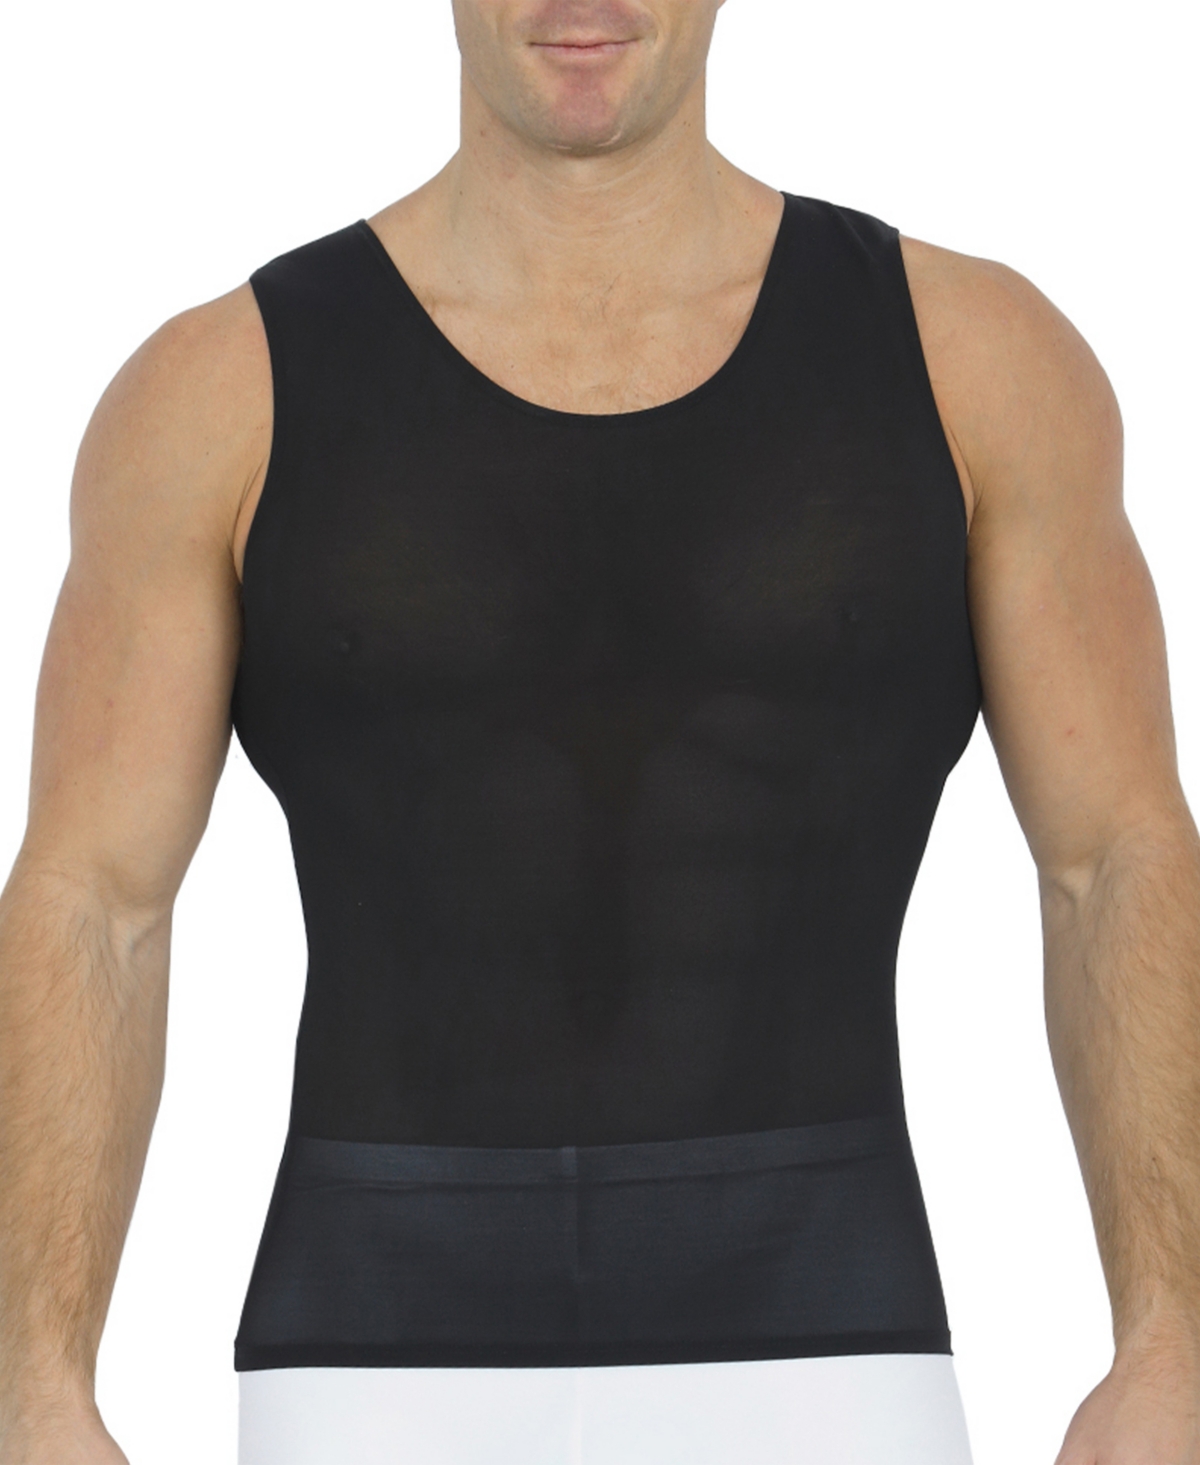 Men's Big & Tall Power Mesh Compression Muscle Tank Top - White